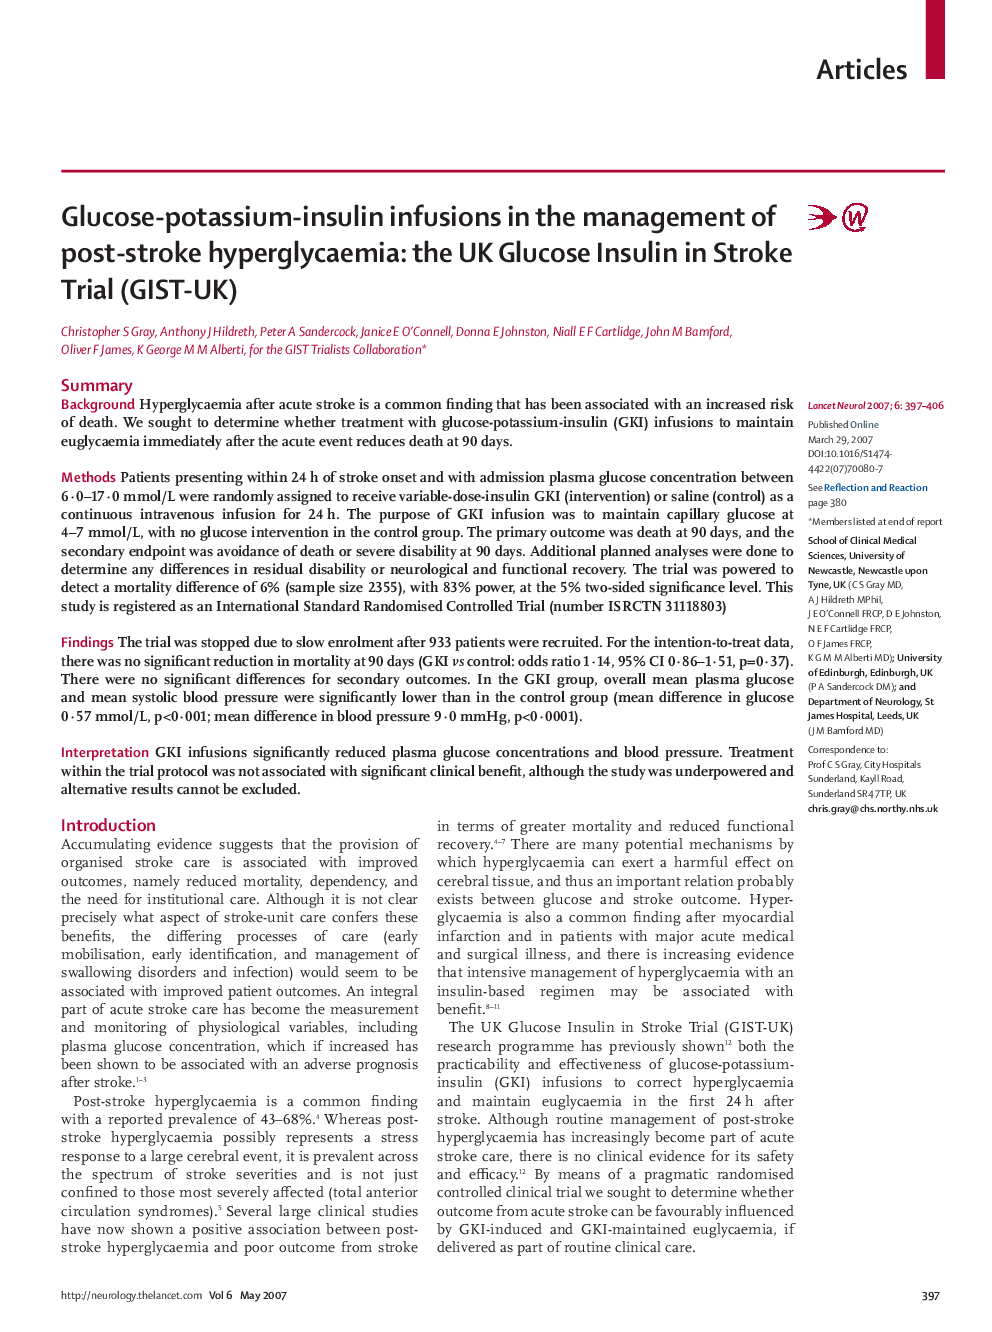 Glucose-potassium-insulin infusions in the management of post-stroke hyperglycaemia: the UK Glucose Insulin in Stroke Trial (GIST-UK)